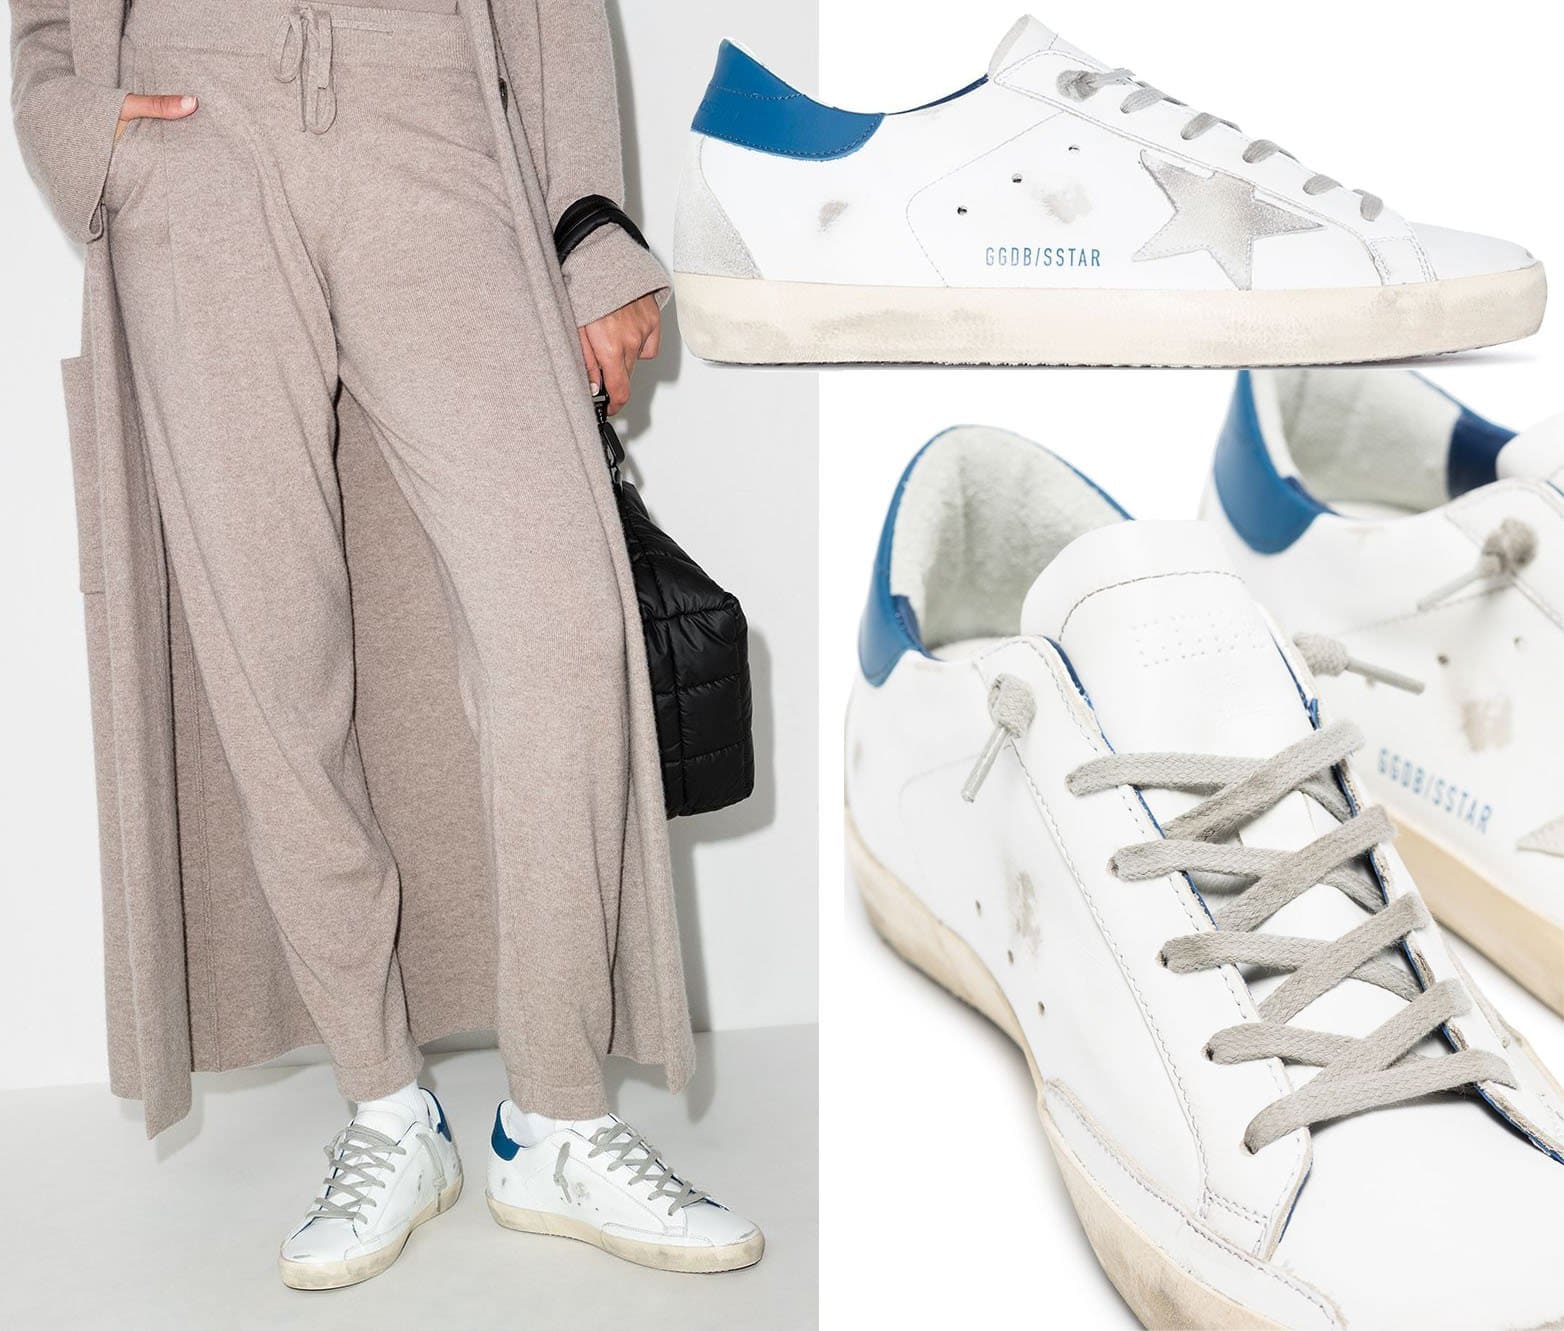 A classic celebrity-favorite, these Super Star sneakers are easily recognizable with Golden Goose's signature distressed aesthetic and star patches